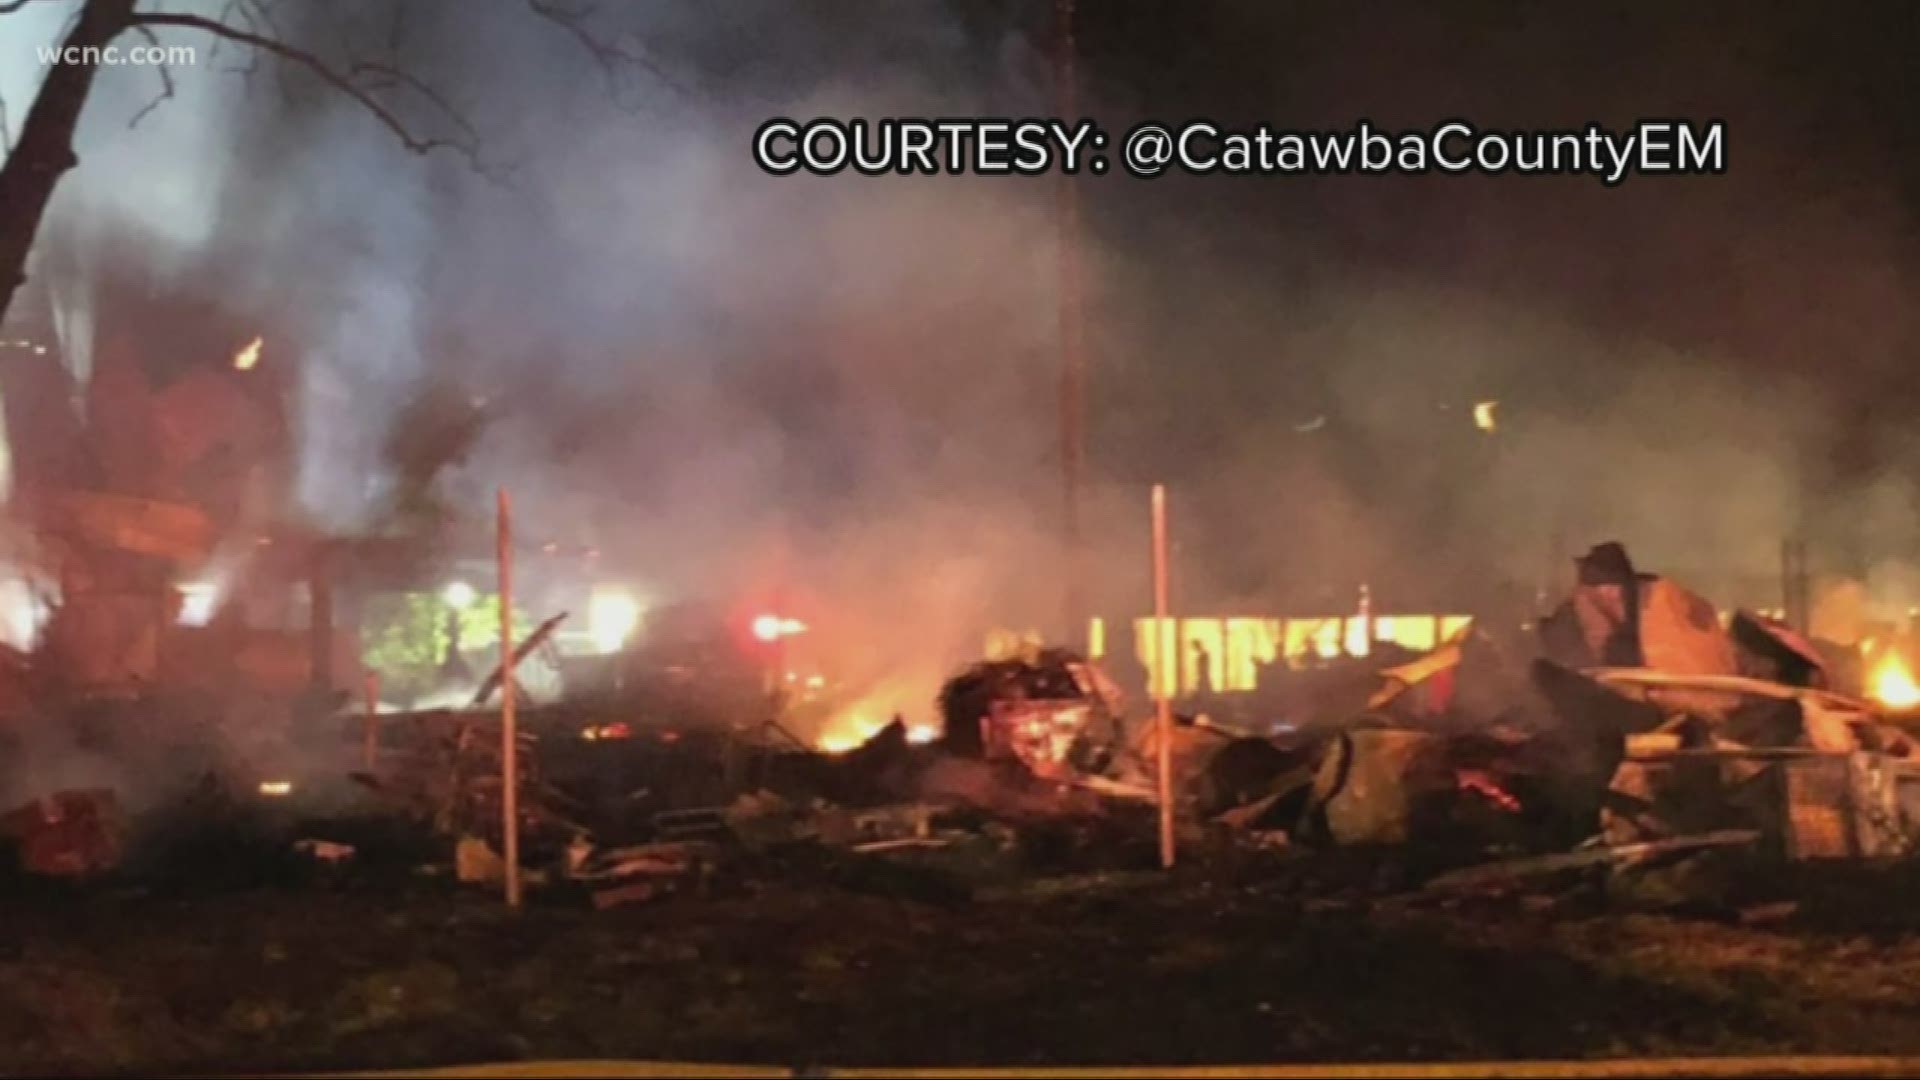 Number cabins were destroyed at a historic campground in Catawba County Sunday night.